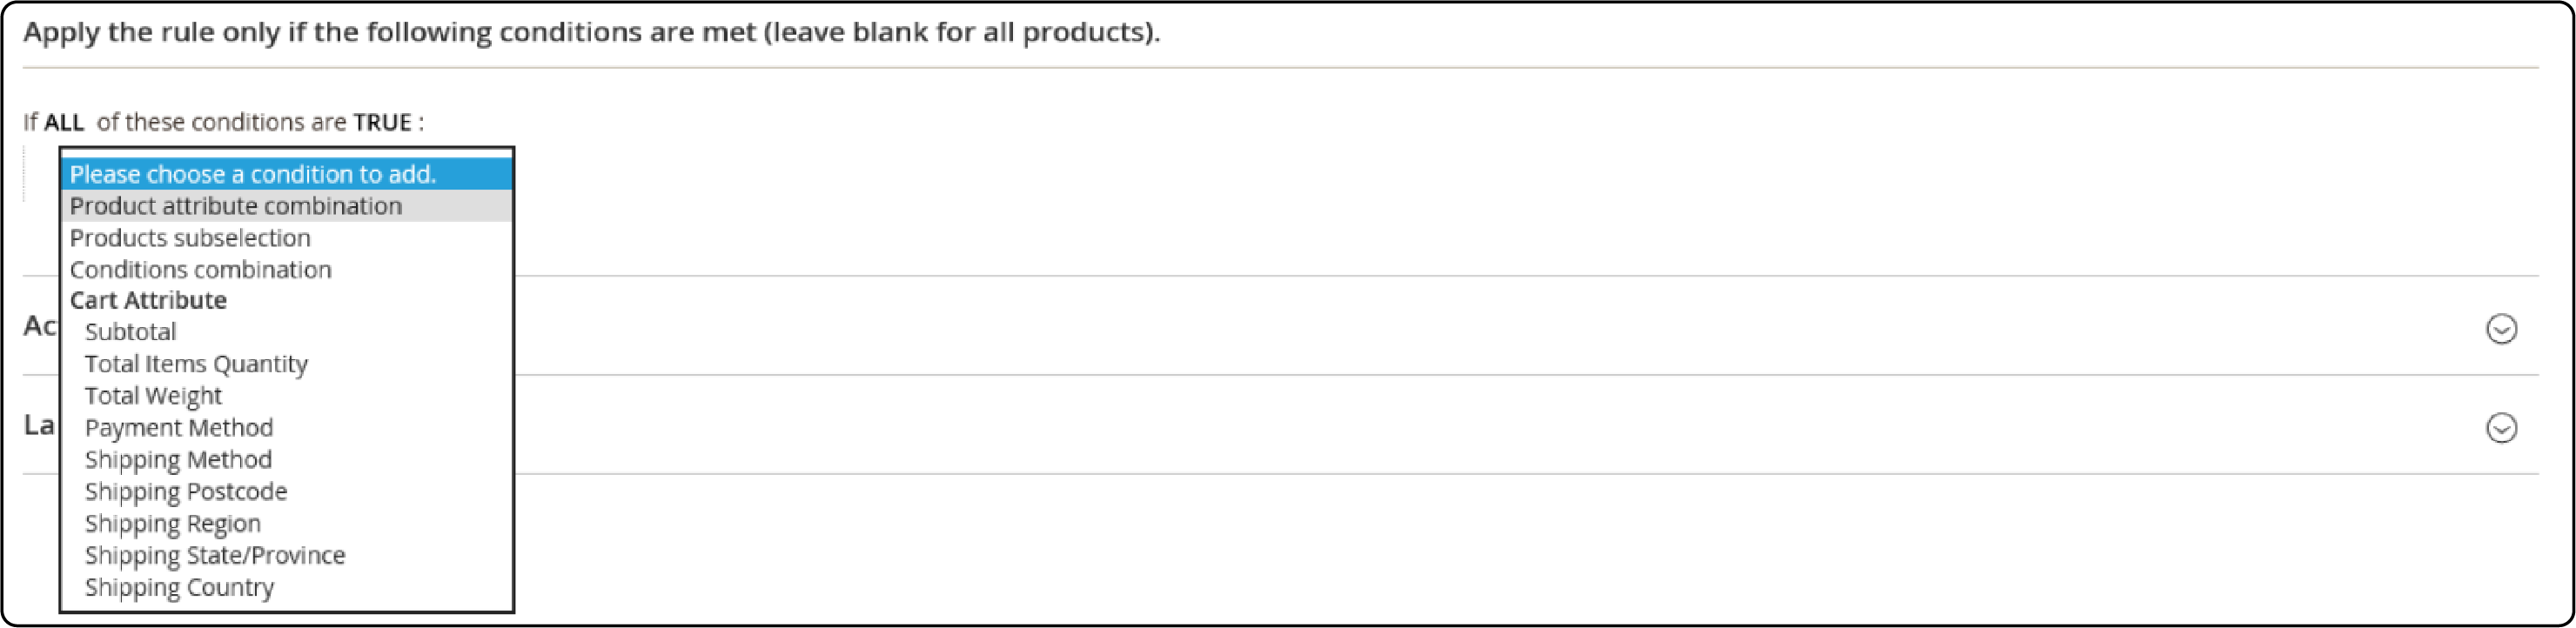 Select Product Attribute Combination in Conditions Tab